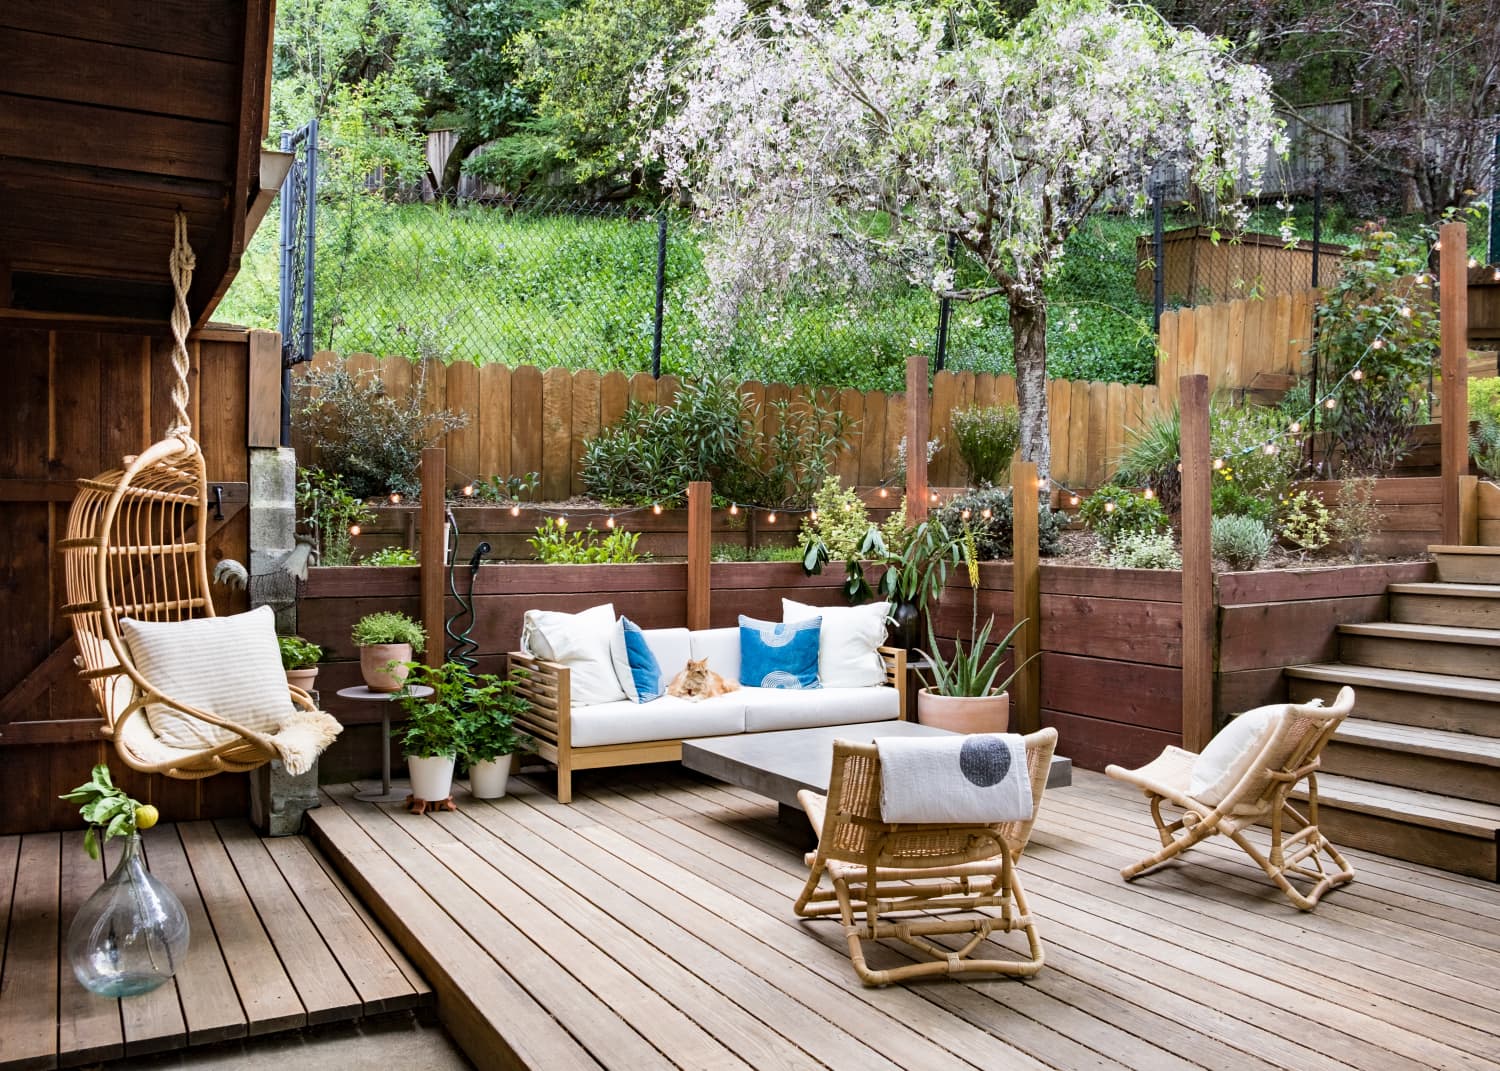 4 Unspoken Rules to Follow for Sharing an Outdoor Space with Neighbors